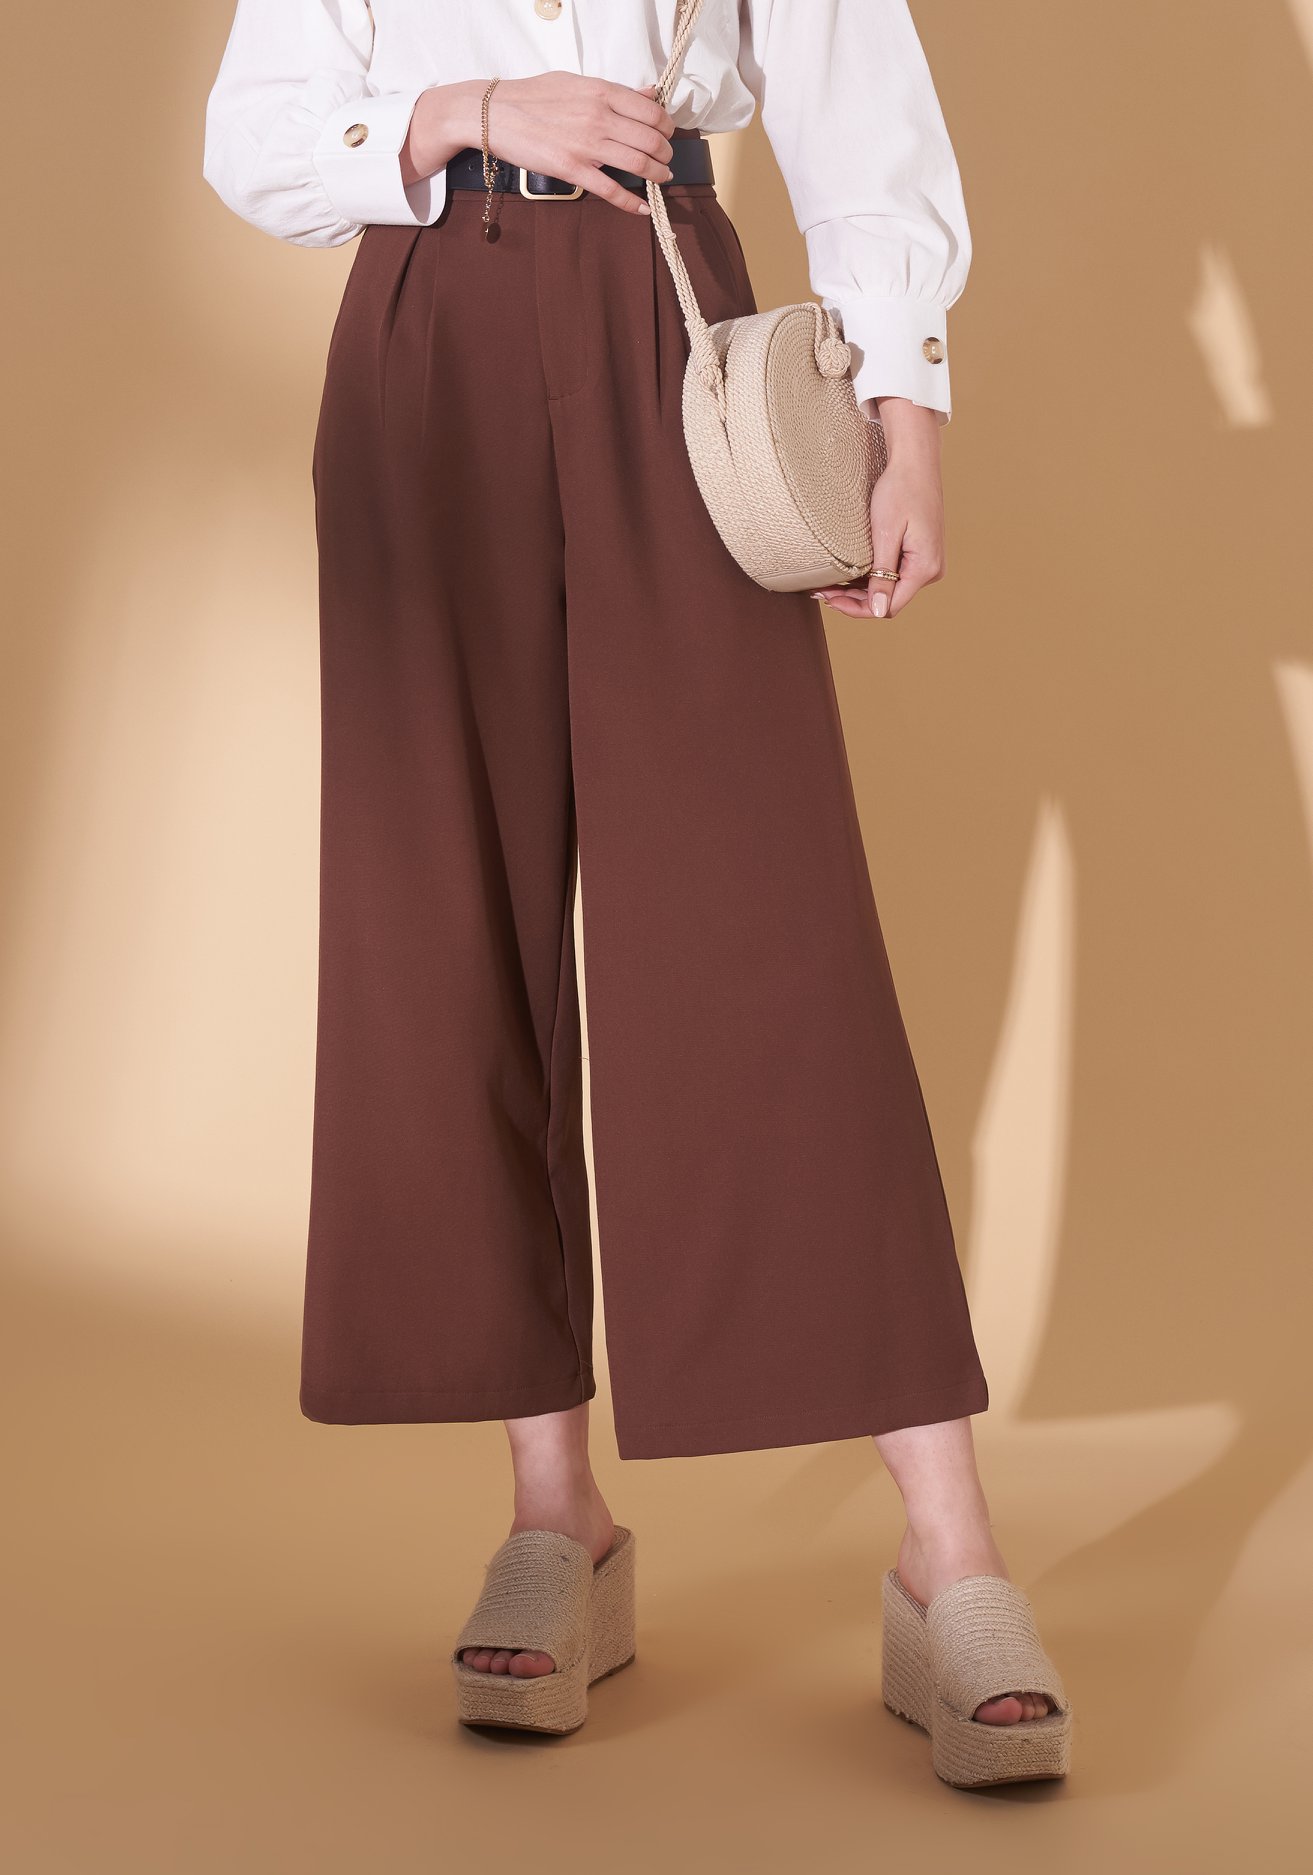 MIKI FOR WOMAN – PANTS COLLECTION